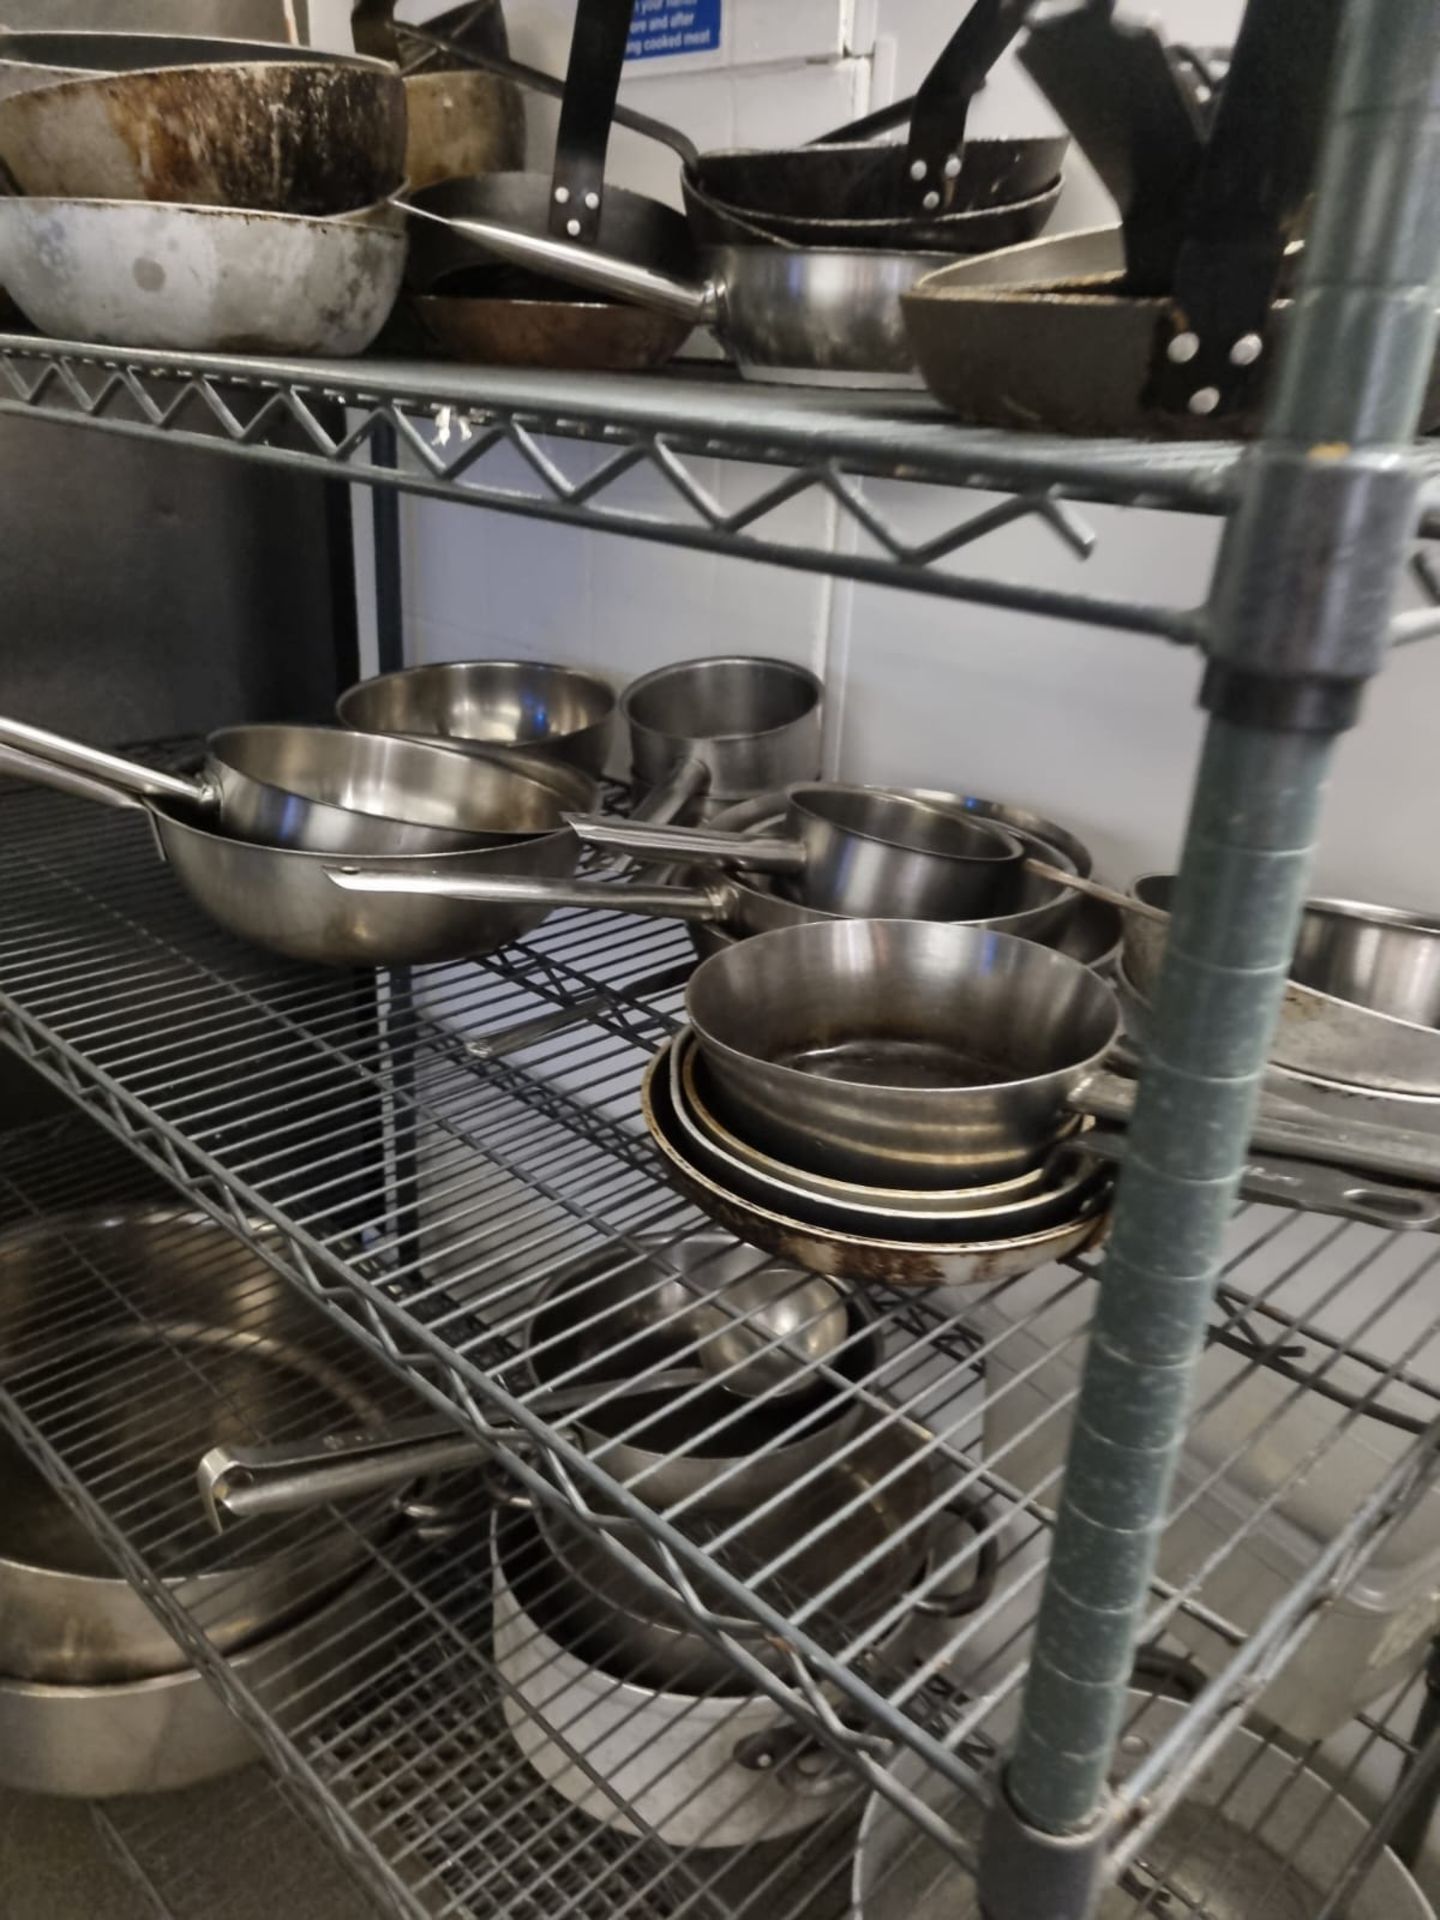 OEM- Various suacepans, stock pots and fry pans as photographed ( Main Kitchen ) - Image 3 of 4